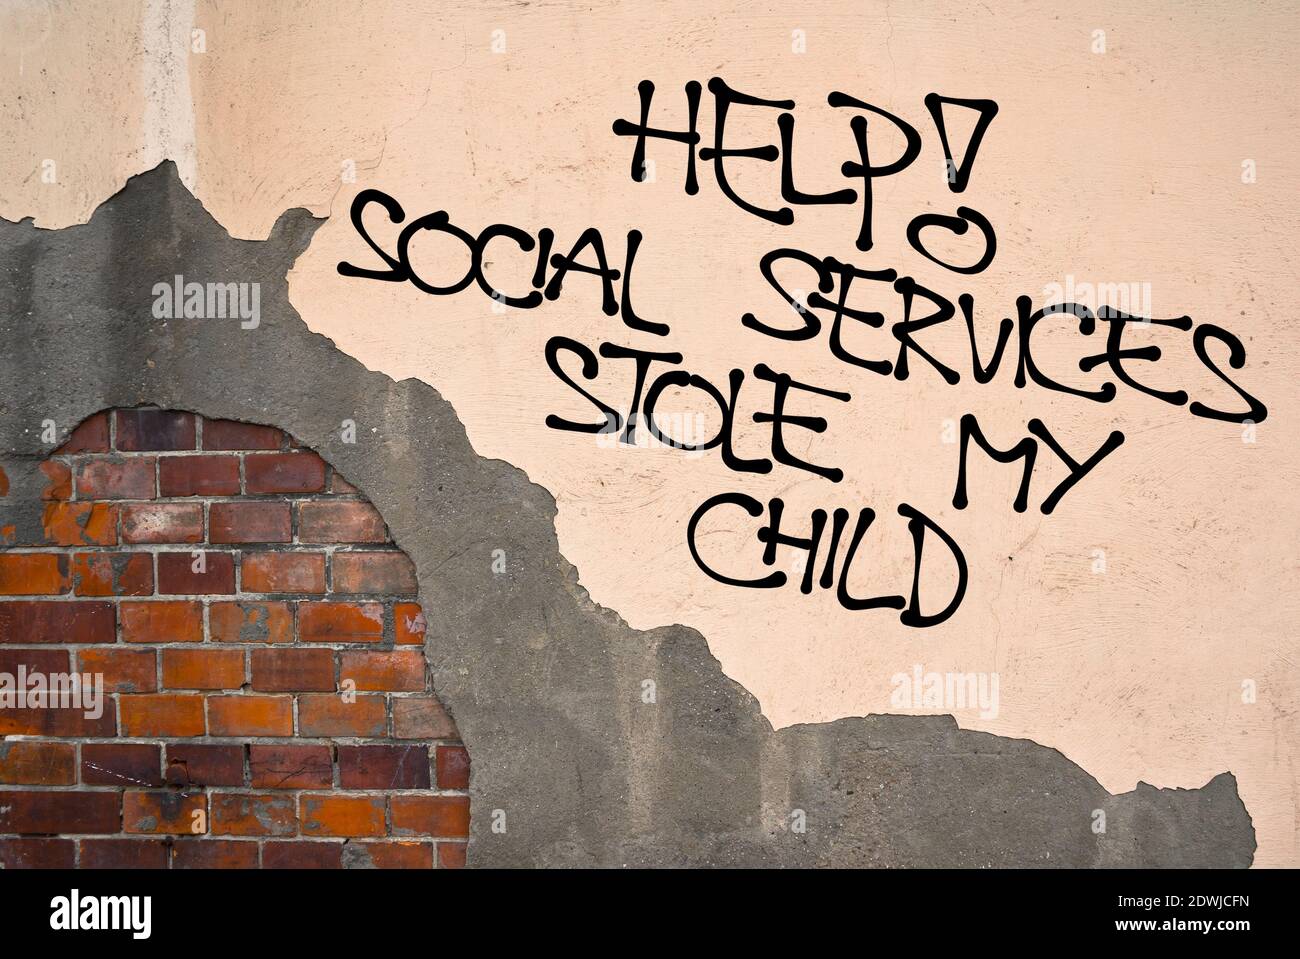 Help! Social Service Stole My Child - handwritten graffiti sprayed on the wall - excessive power of child protective institution, removing and separat Stock Photo